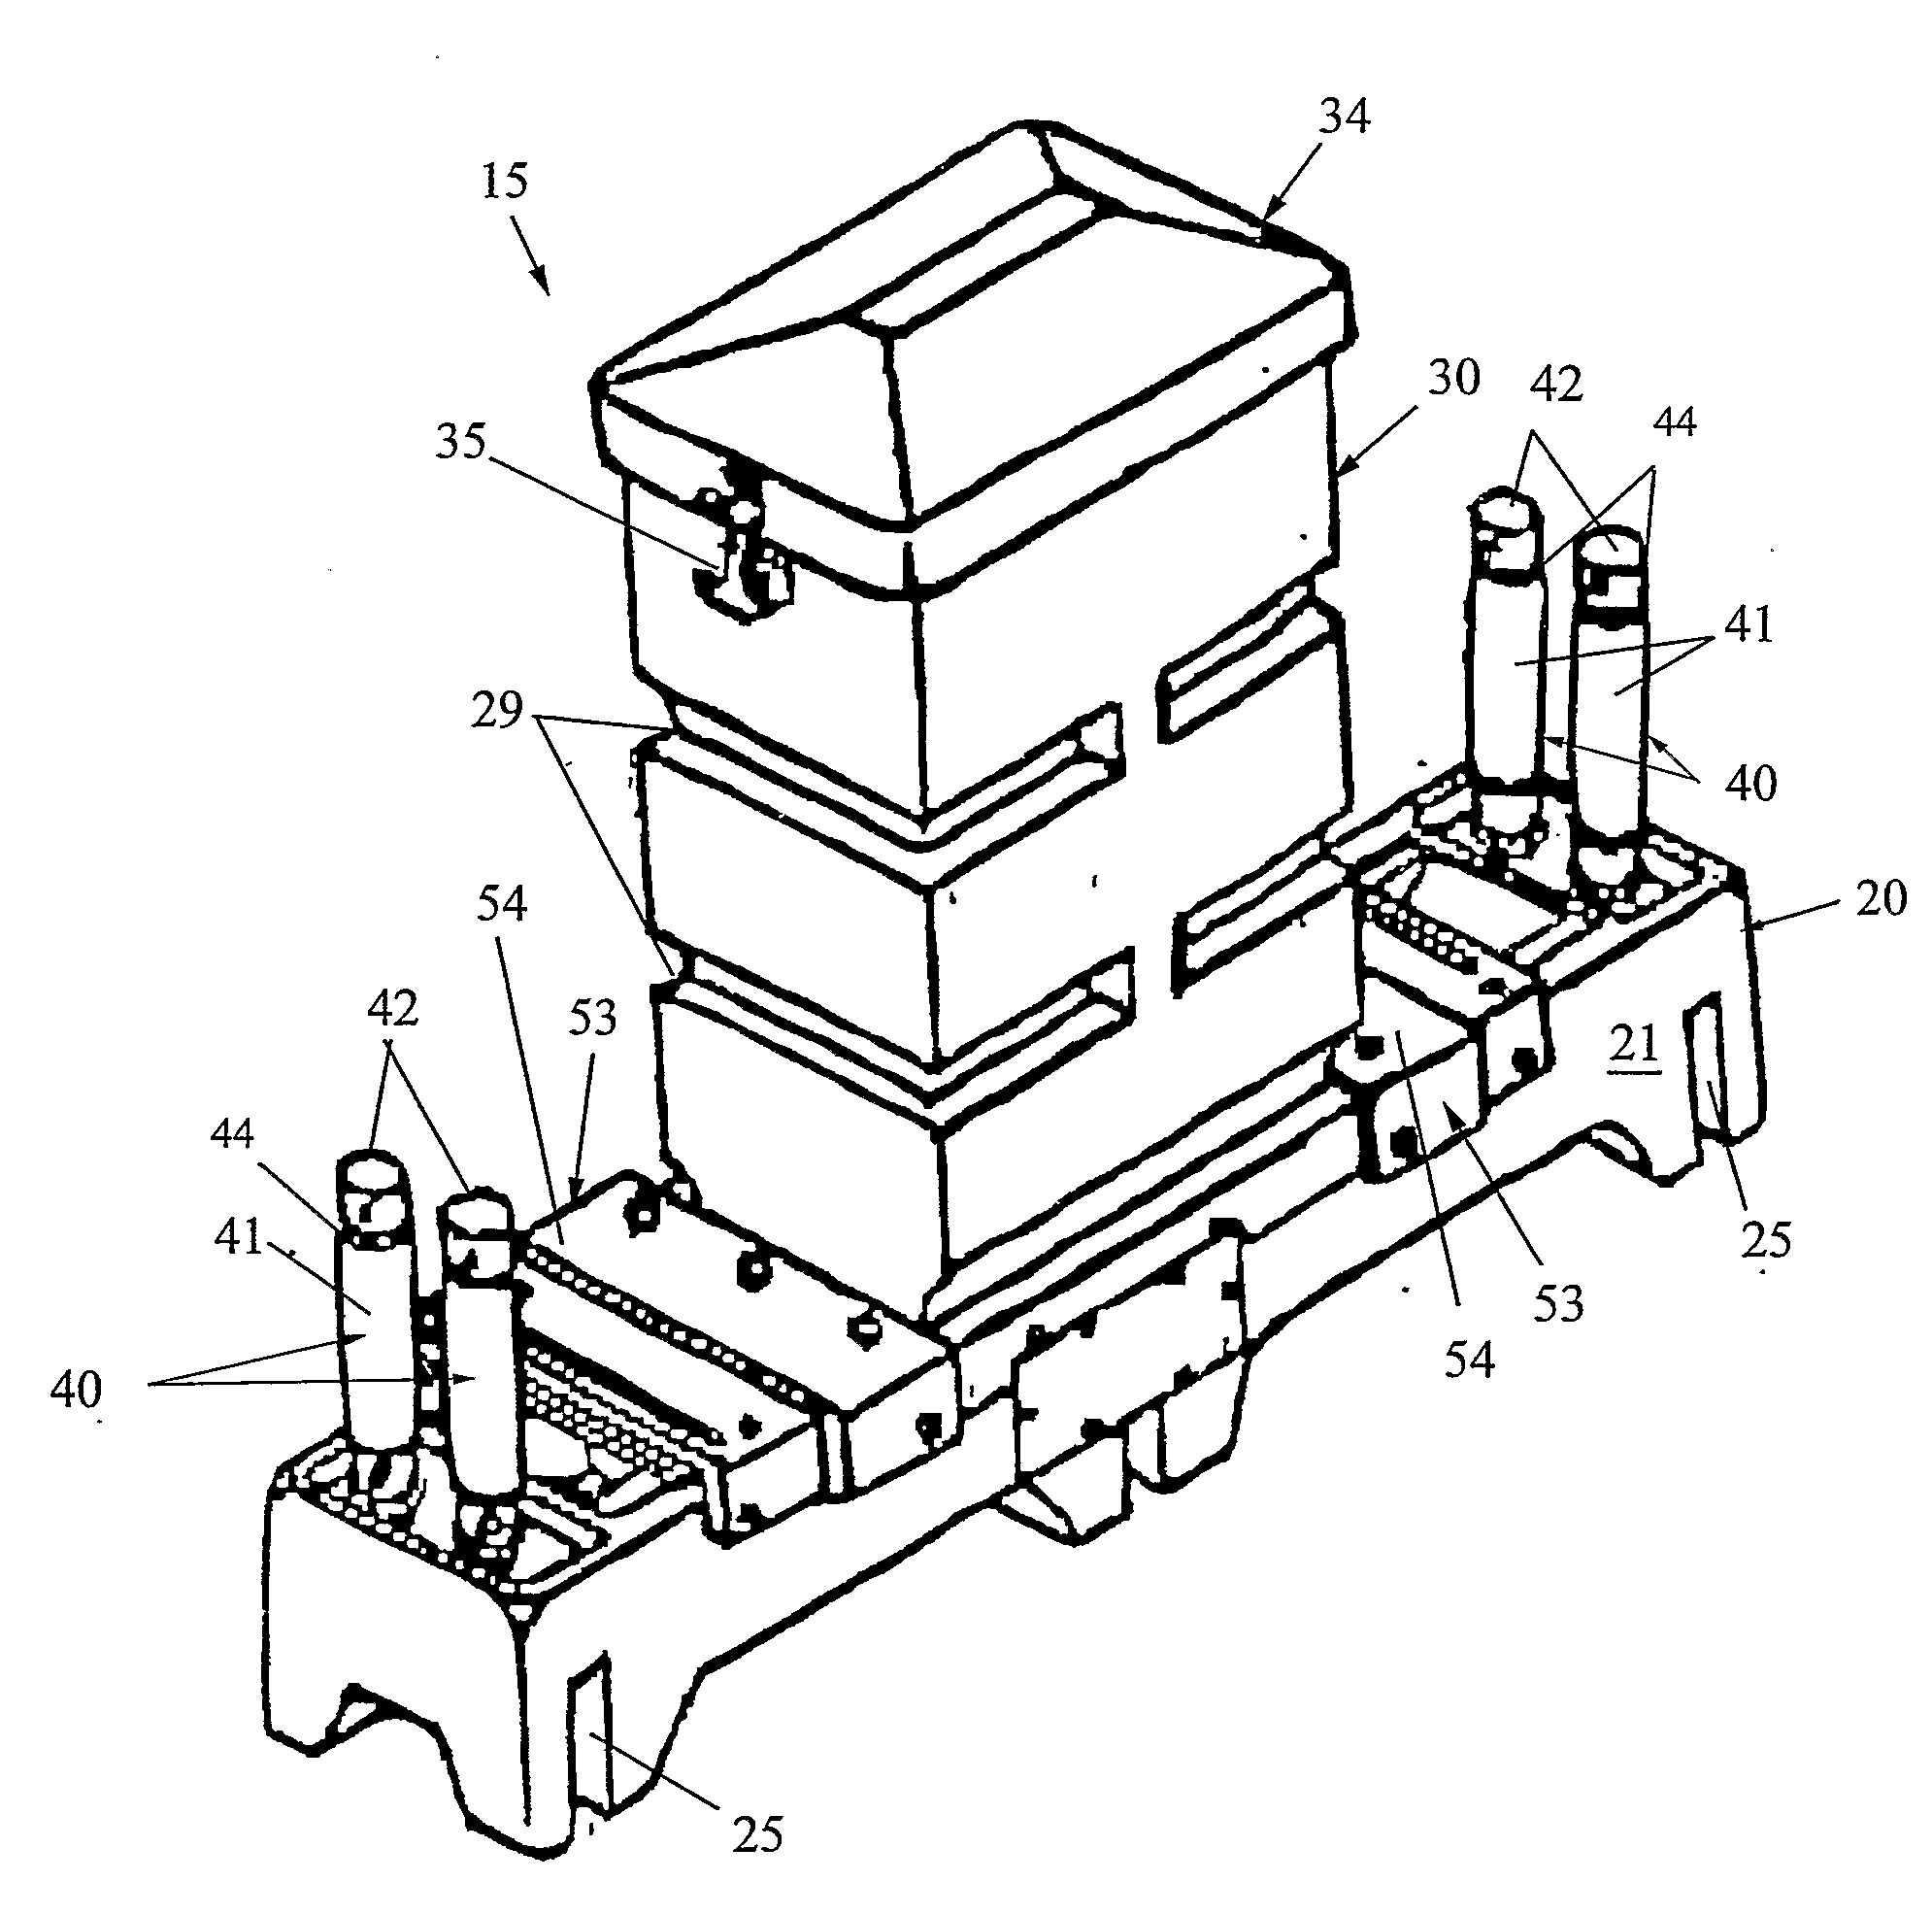 Apparatus for Use in Controlling The Spread of Ectoparasite-Borne Diseases